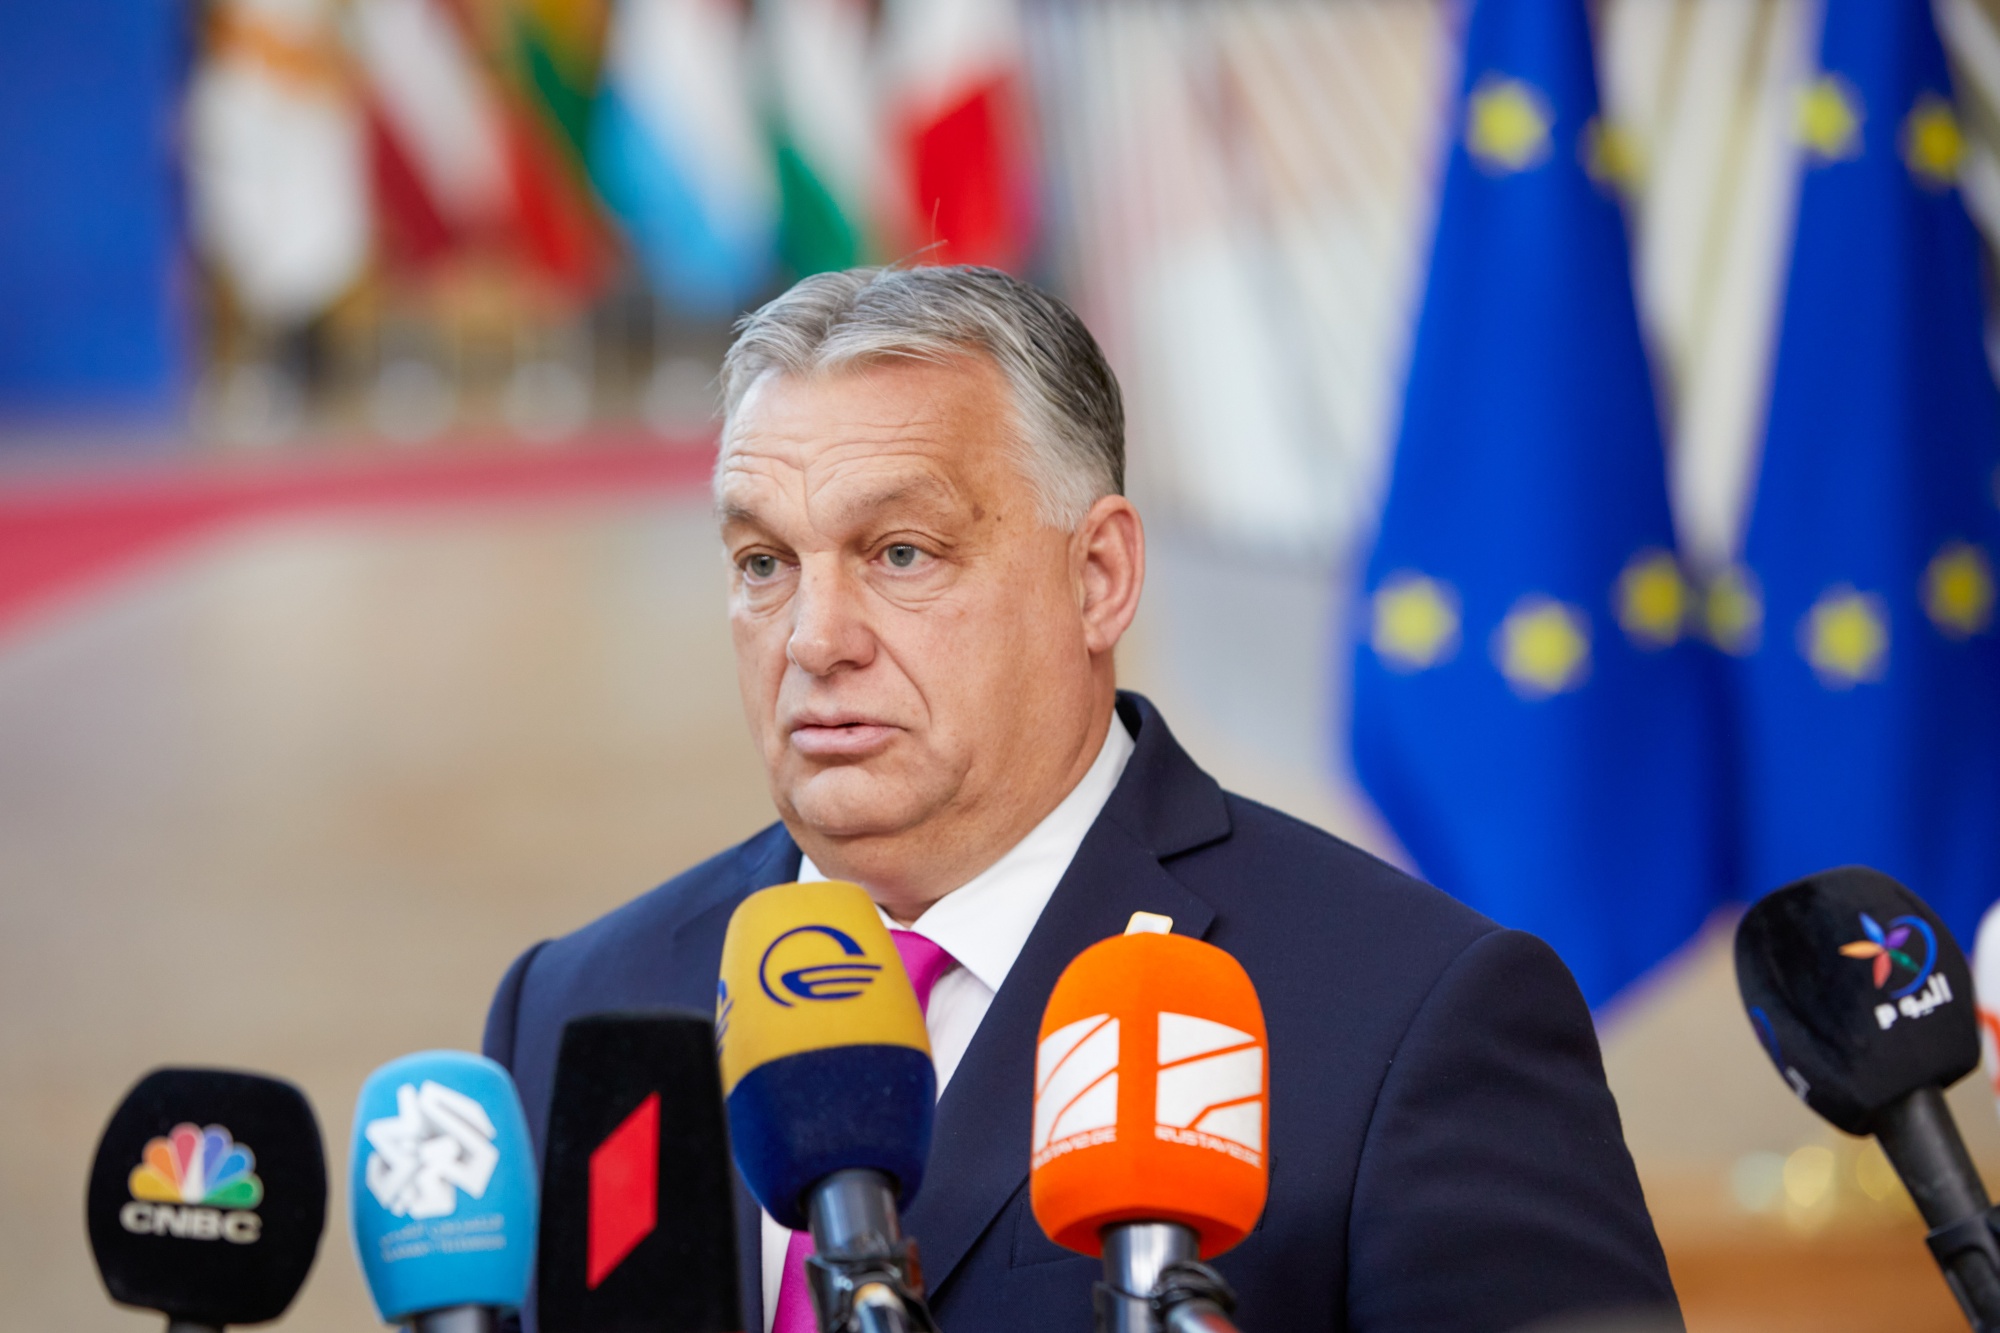 Viktor Orban, Hungary's prime minister, at a summit of European Union leaders in Brussels.